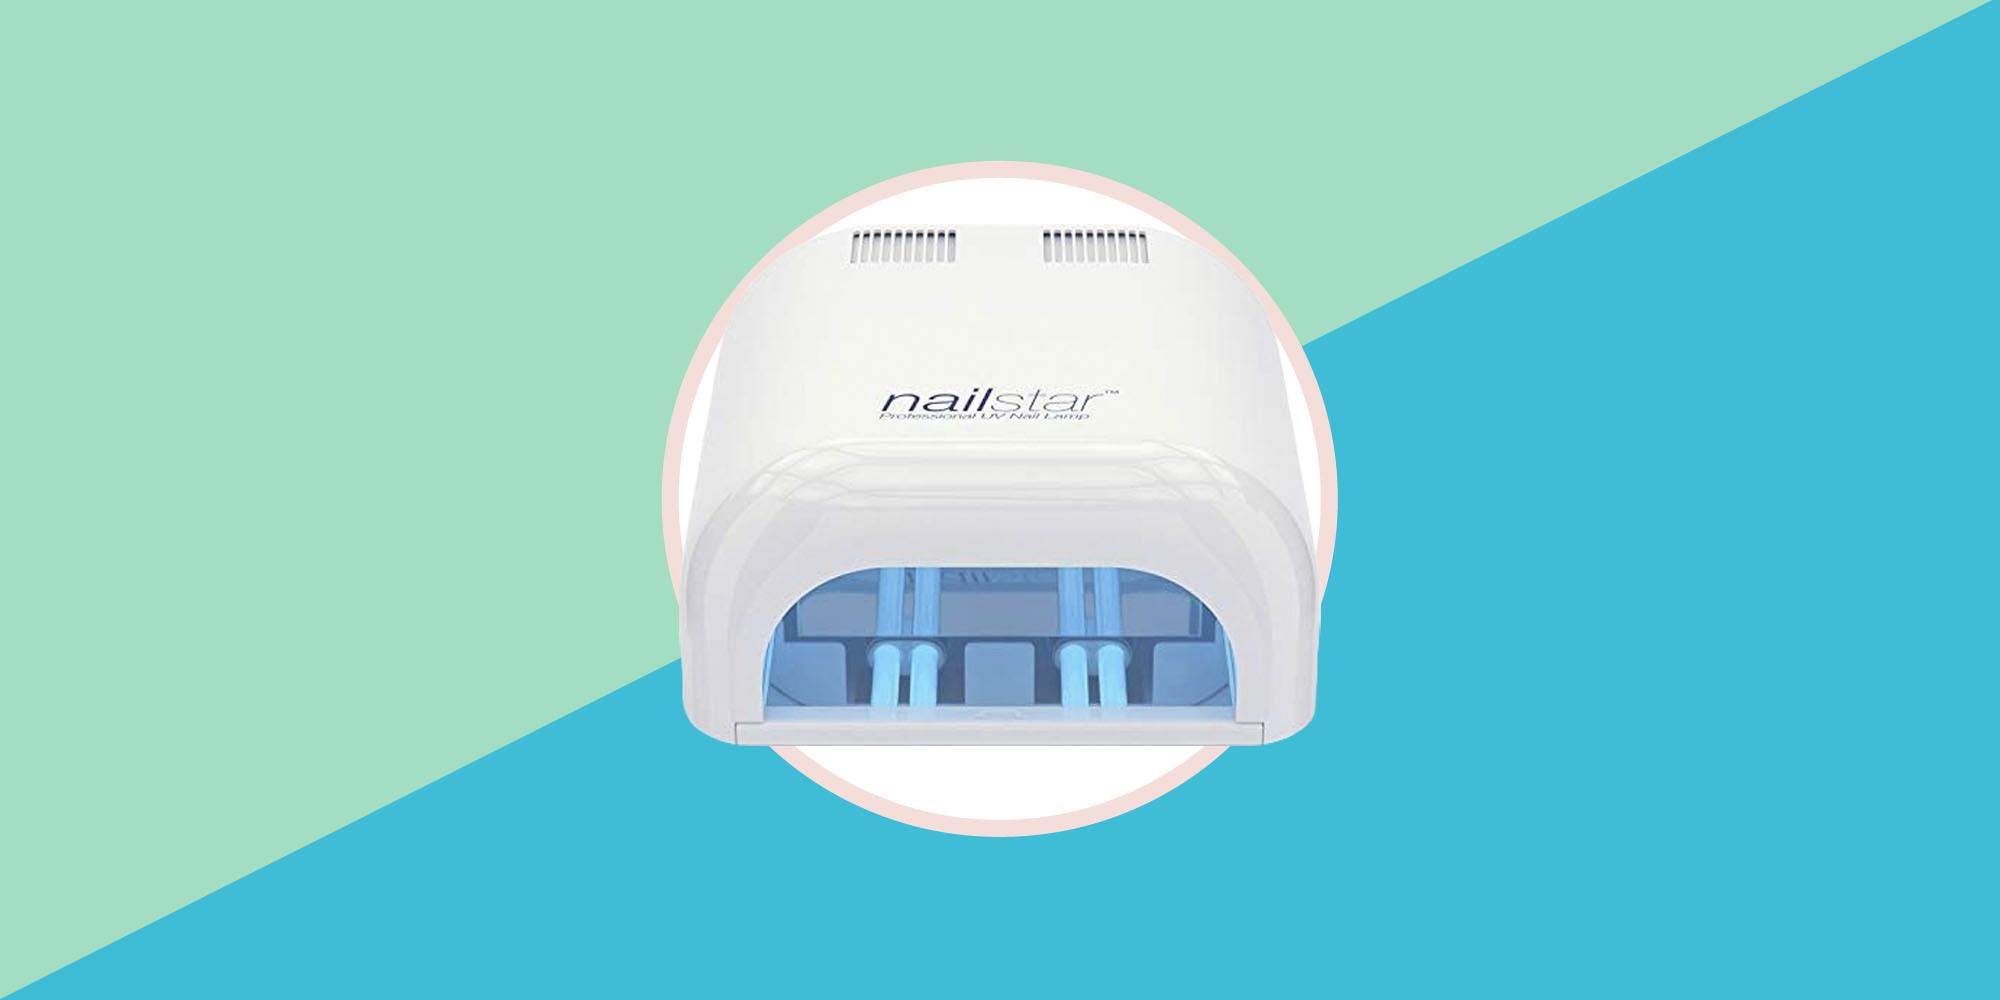 UV vs LED Nail Lamp: What is the Difference? – Mylee